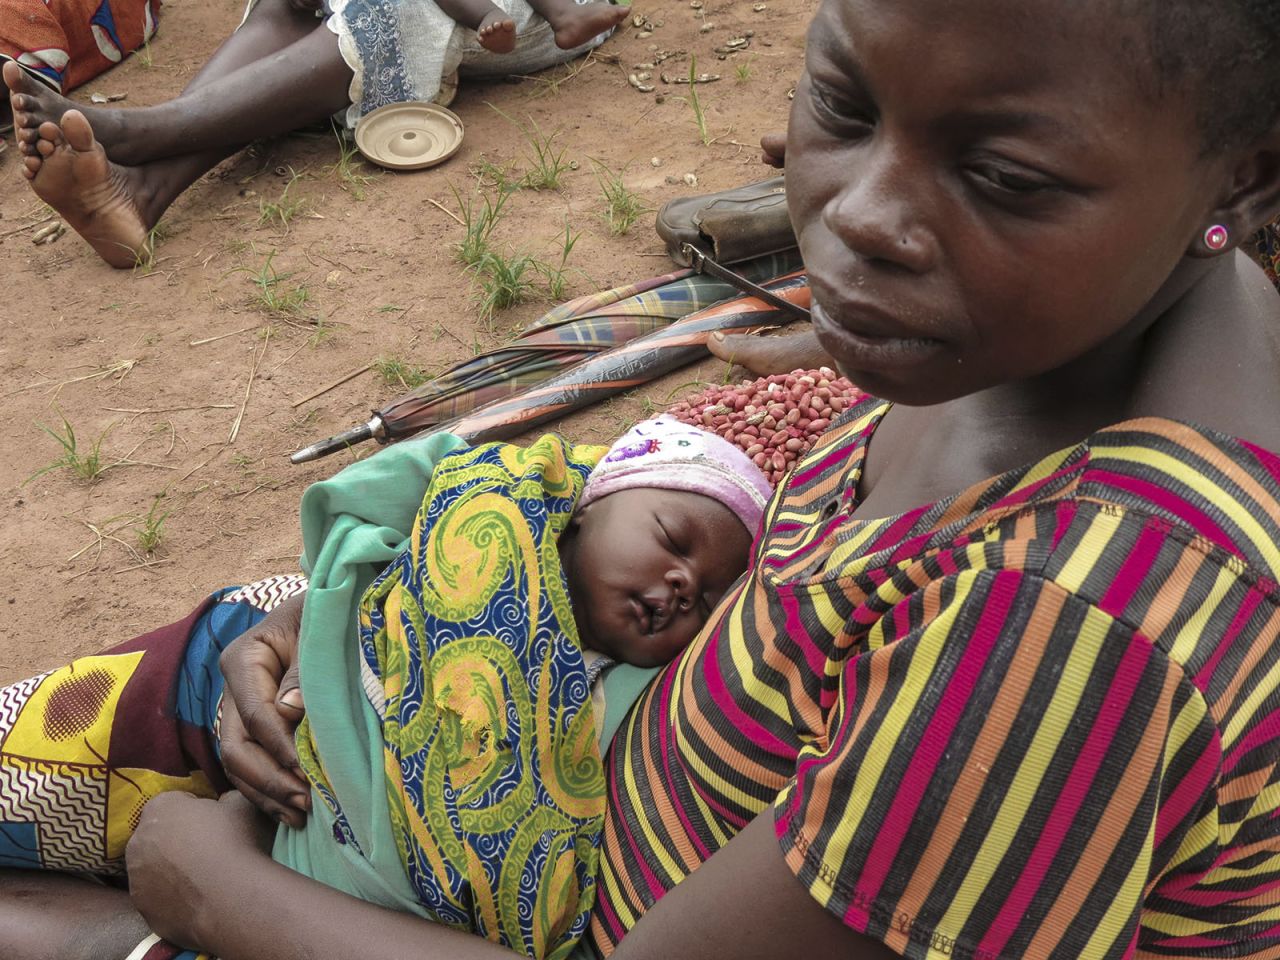 177. One in seven children in the <strong>Central African Republic</strong> do not reach their 7th birthday. Joselyn has brought her daughter Emily, 2 weeks old, to a Save the Children-supported health post to be vaccinated against diseases such as measles and polio. 